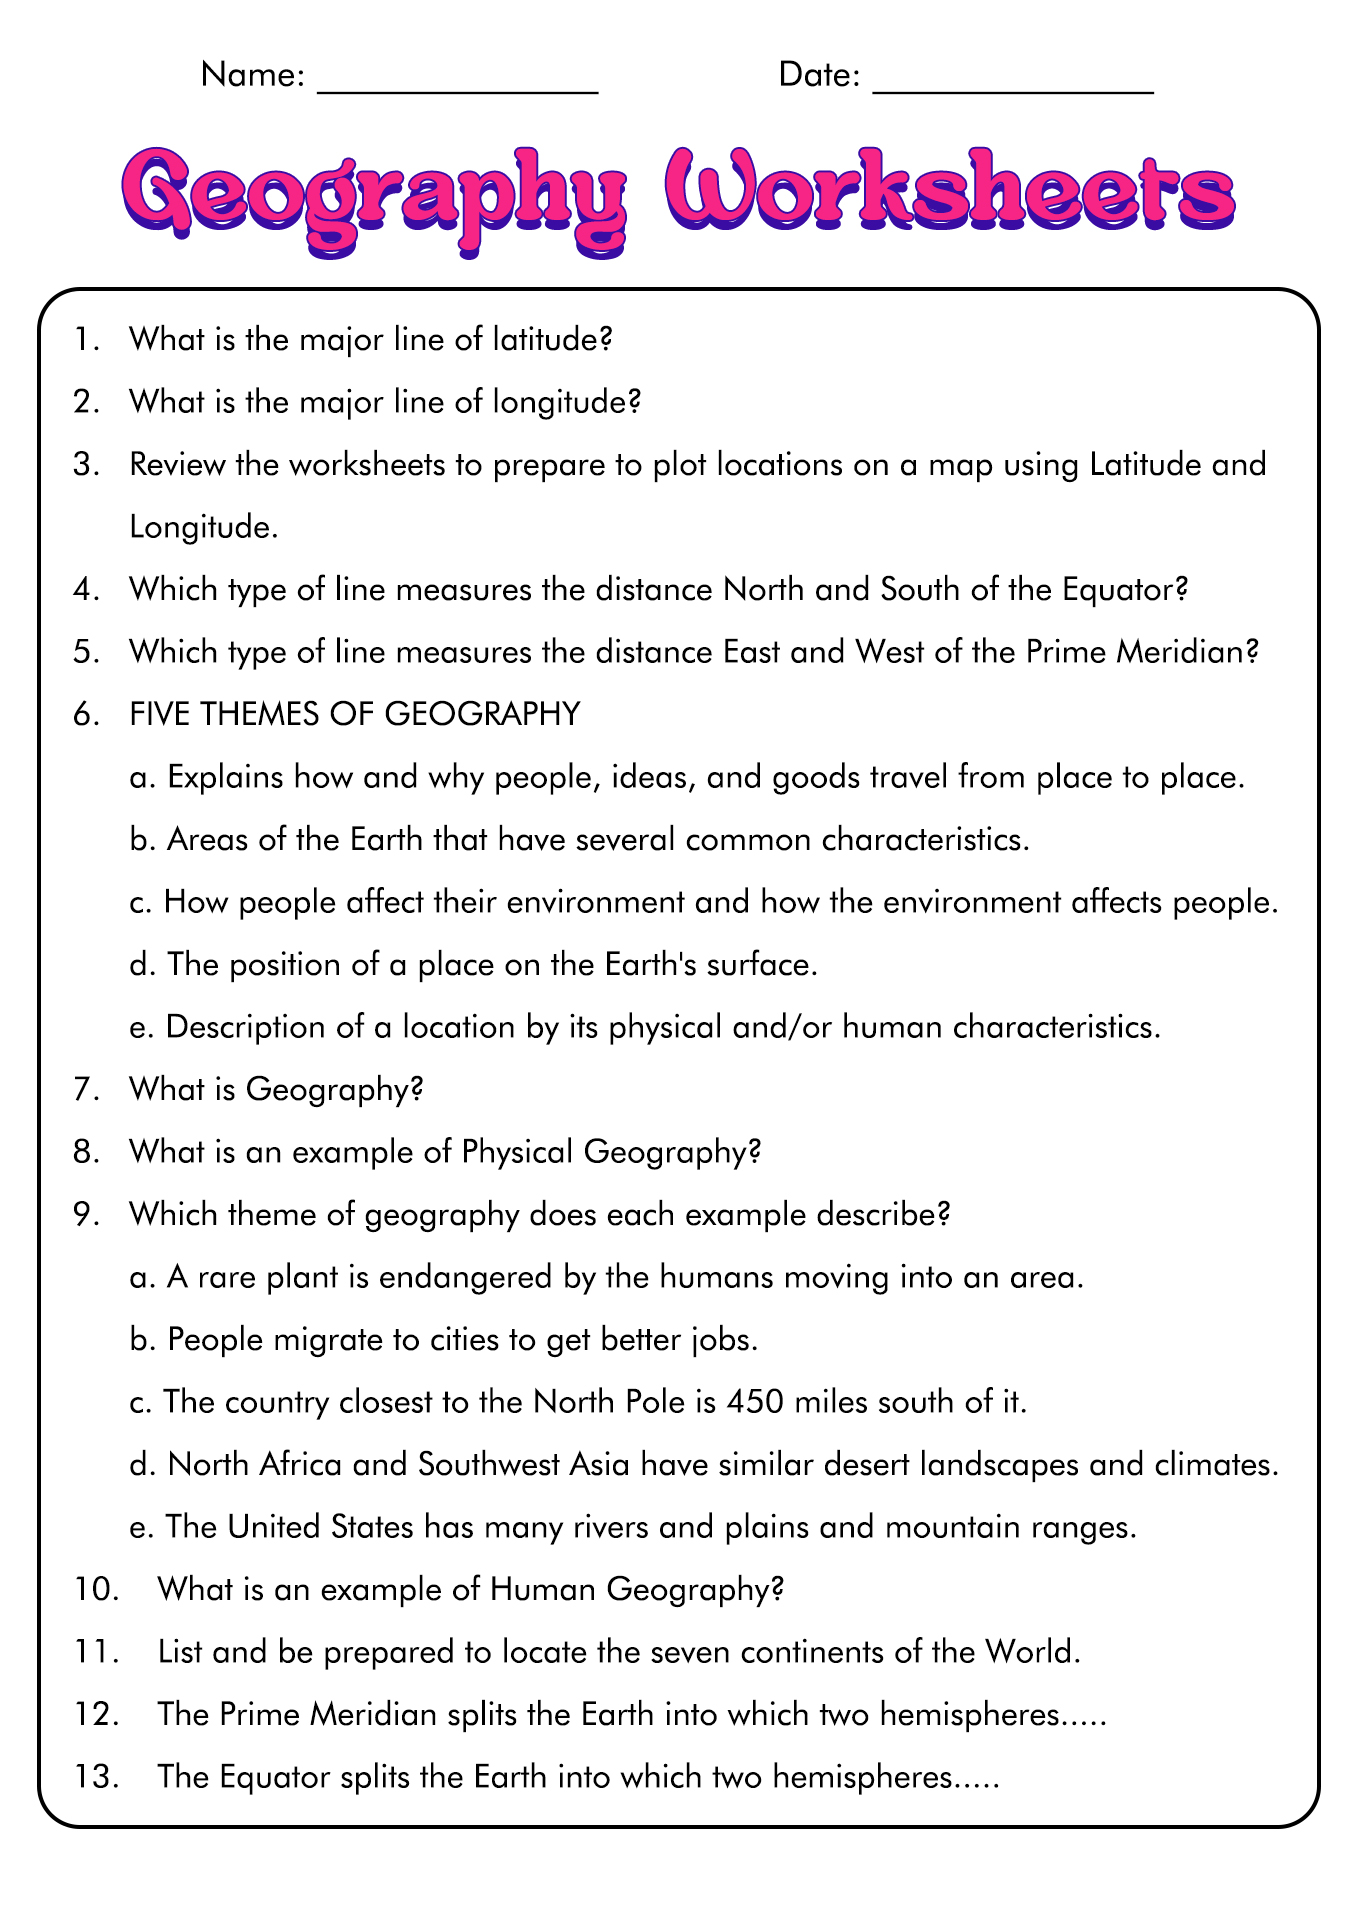 5 Themes of Geography Worksheets